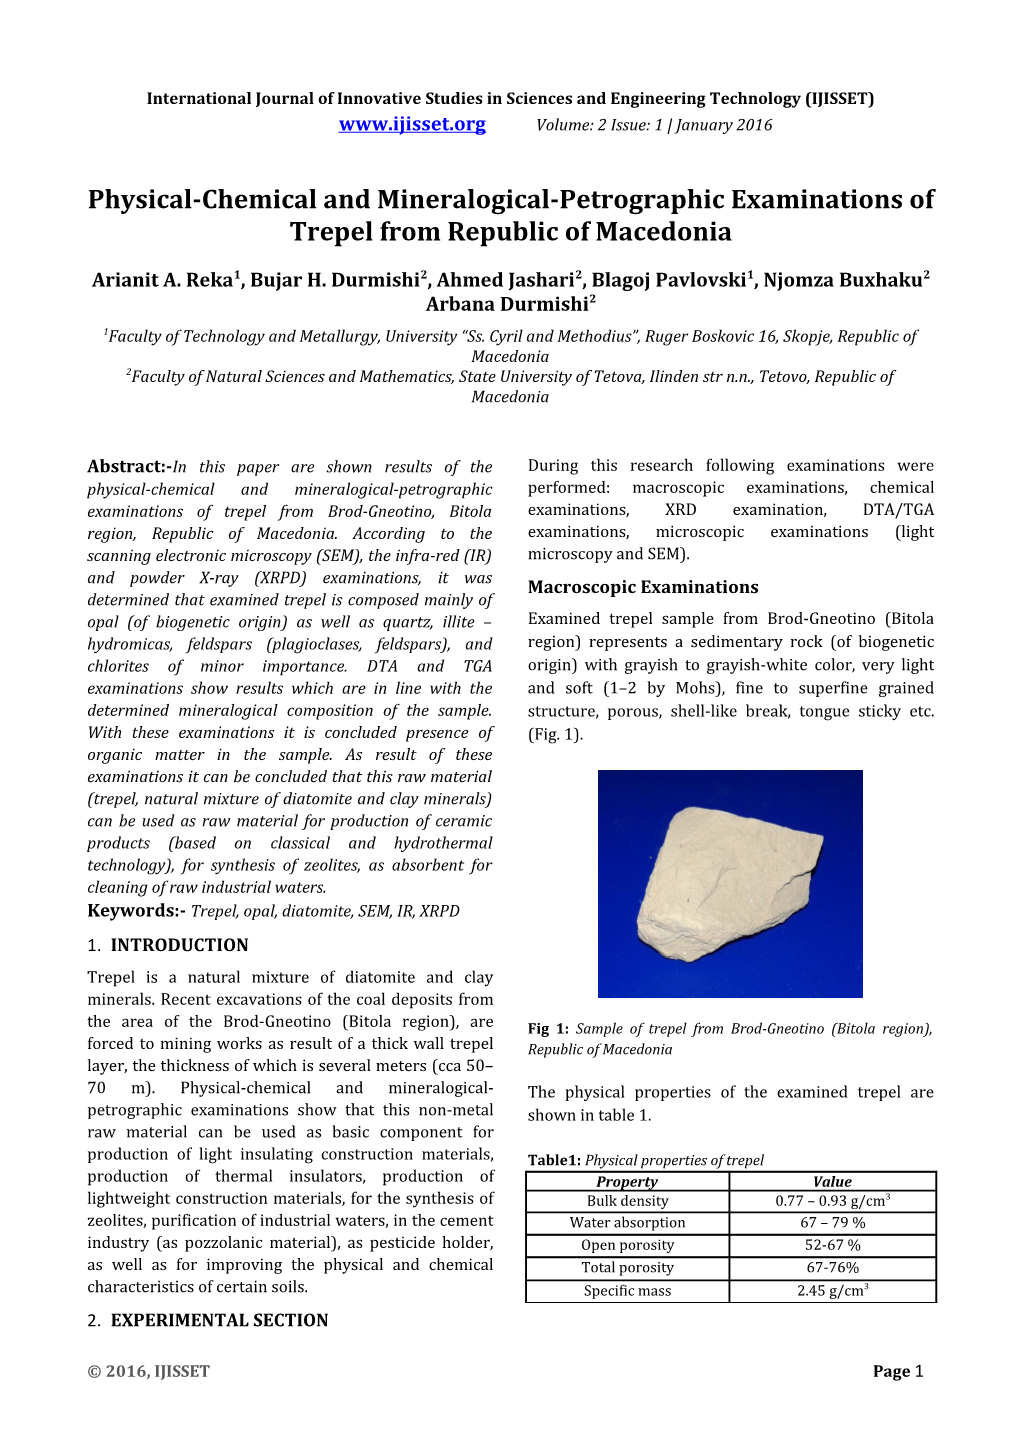 Physical-Chemical and Mineralogical-Petrographic Examinations of Trepel from Republic